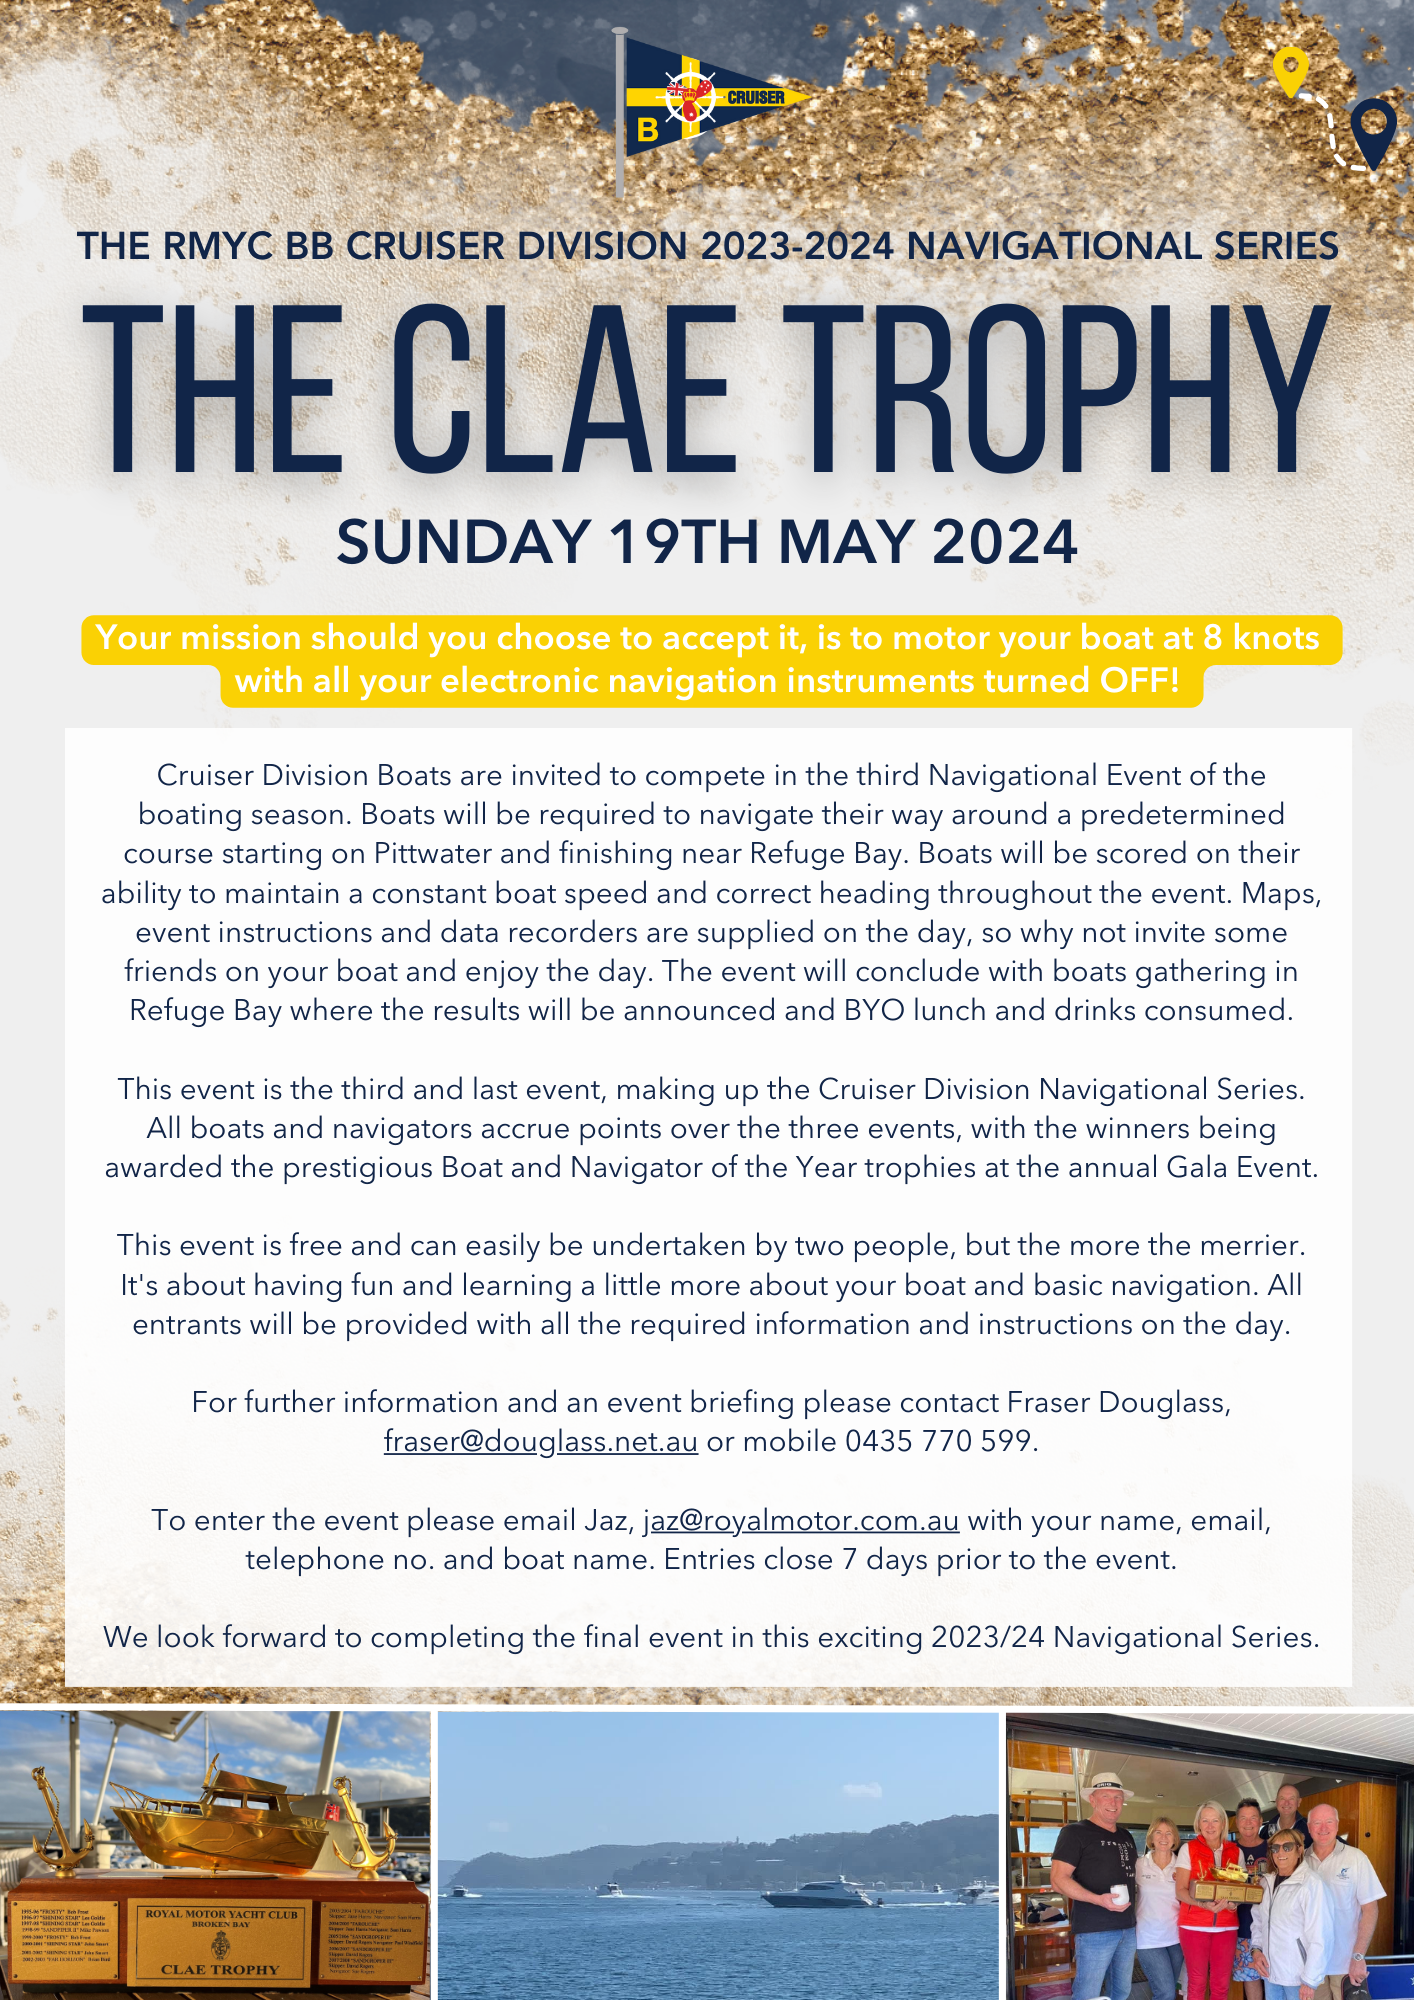 THE CLAE TROPHY - Sunday 19th May 2024